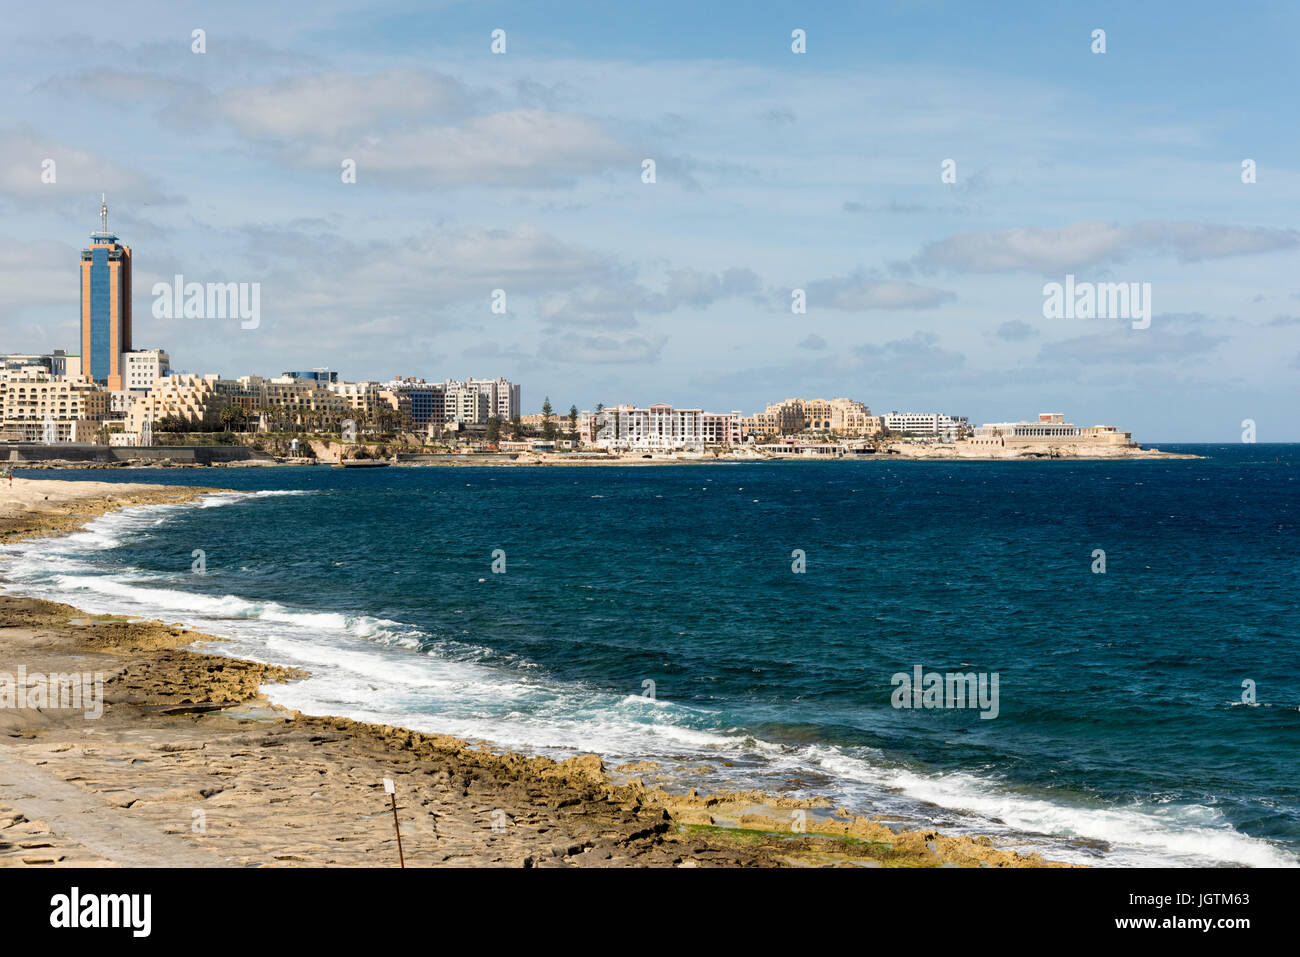 The rocky shore and sea at St Julians Bay Malta with the town of St Julians and the Pormaso tower in the background Stock Photo